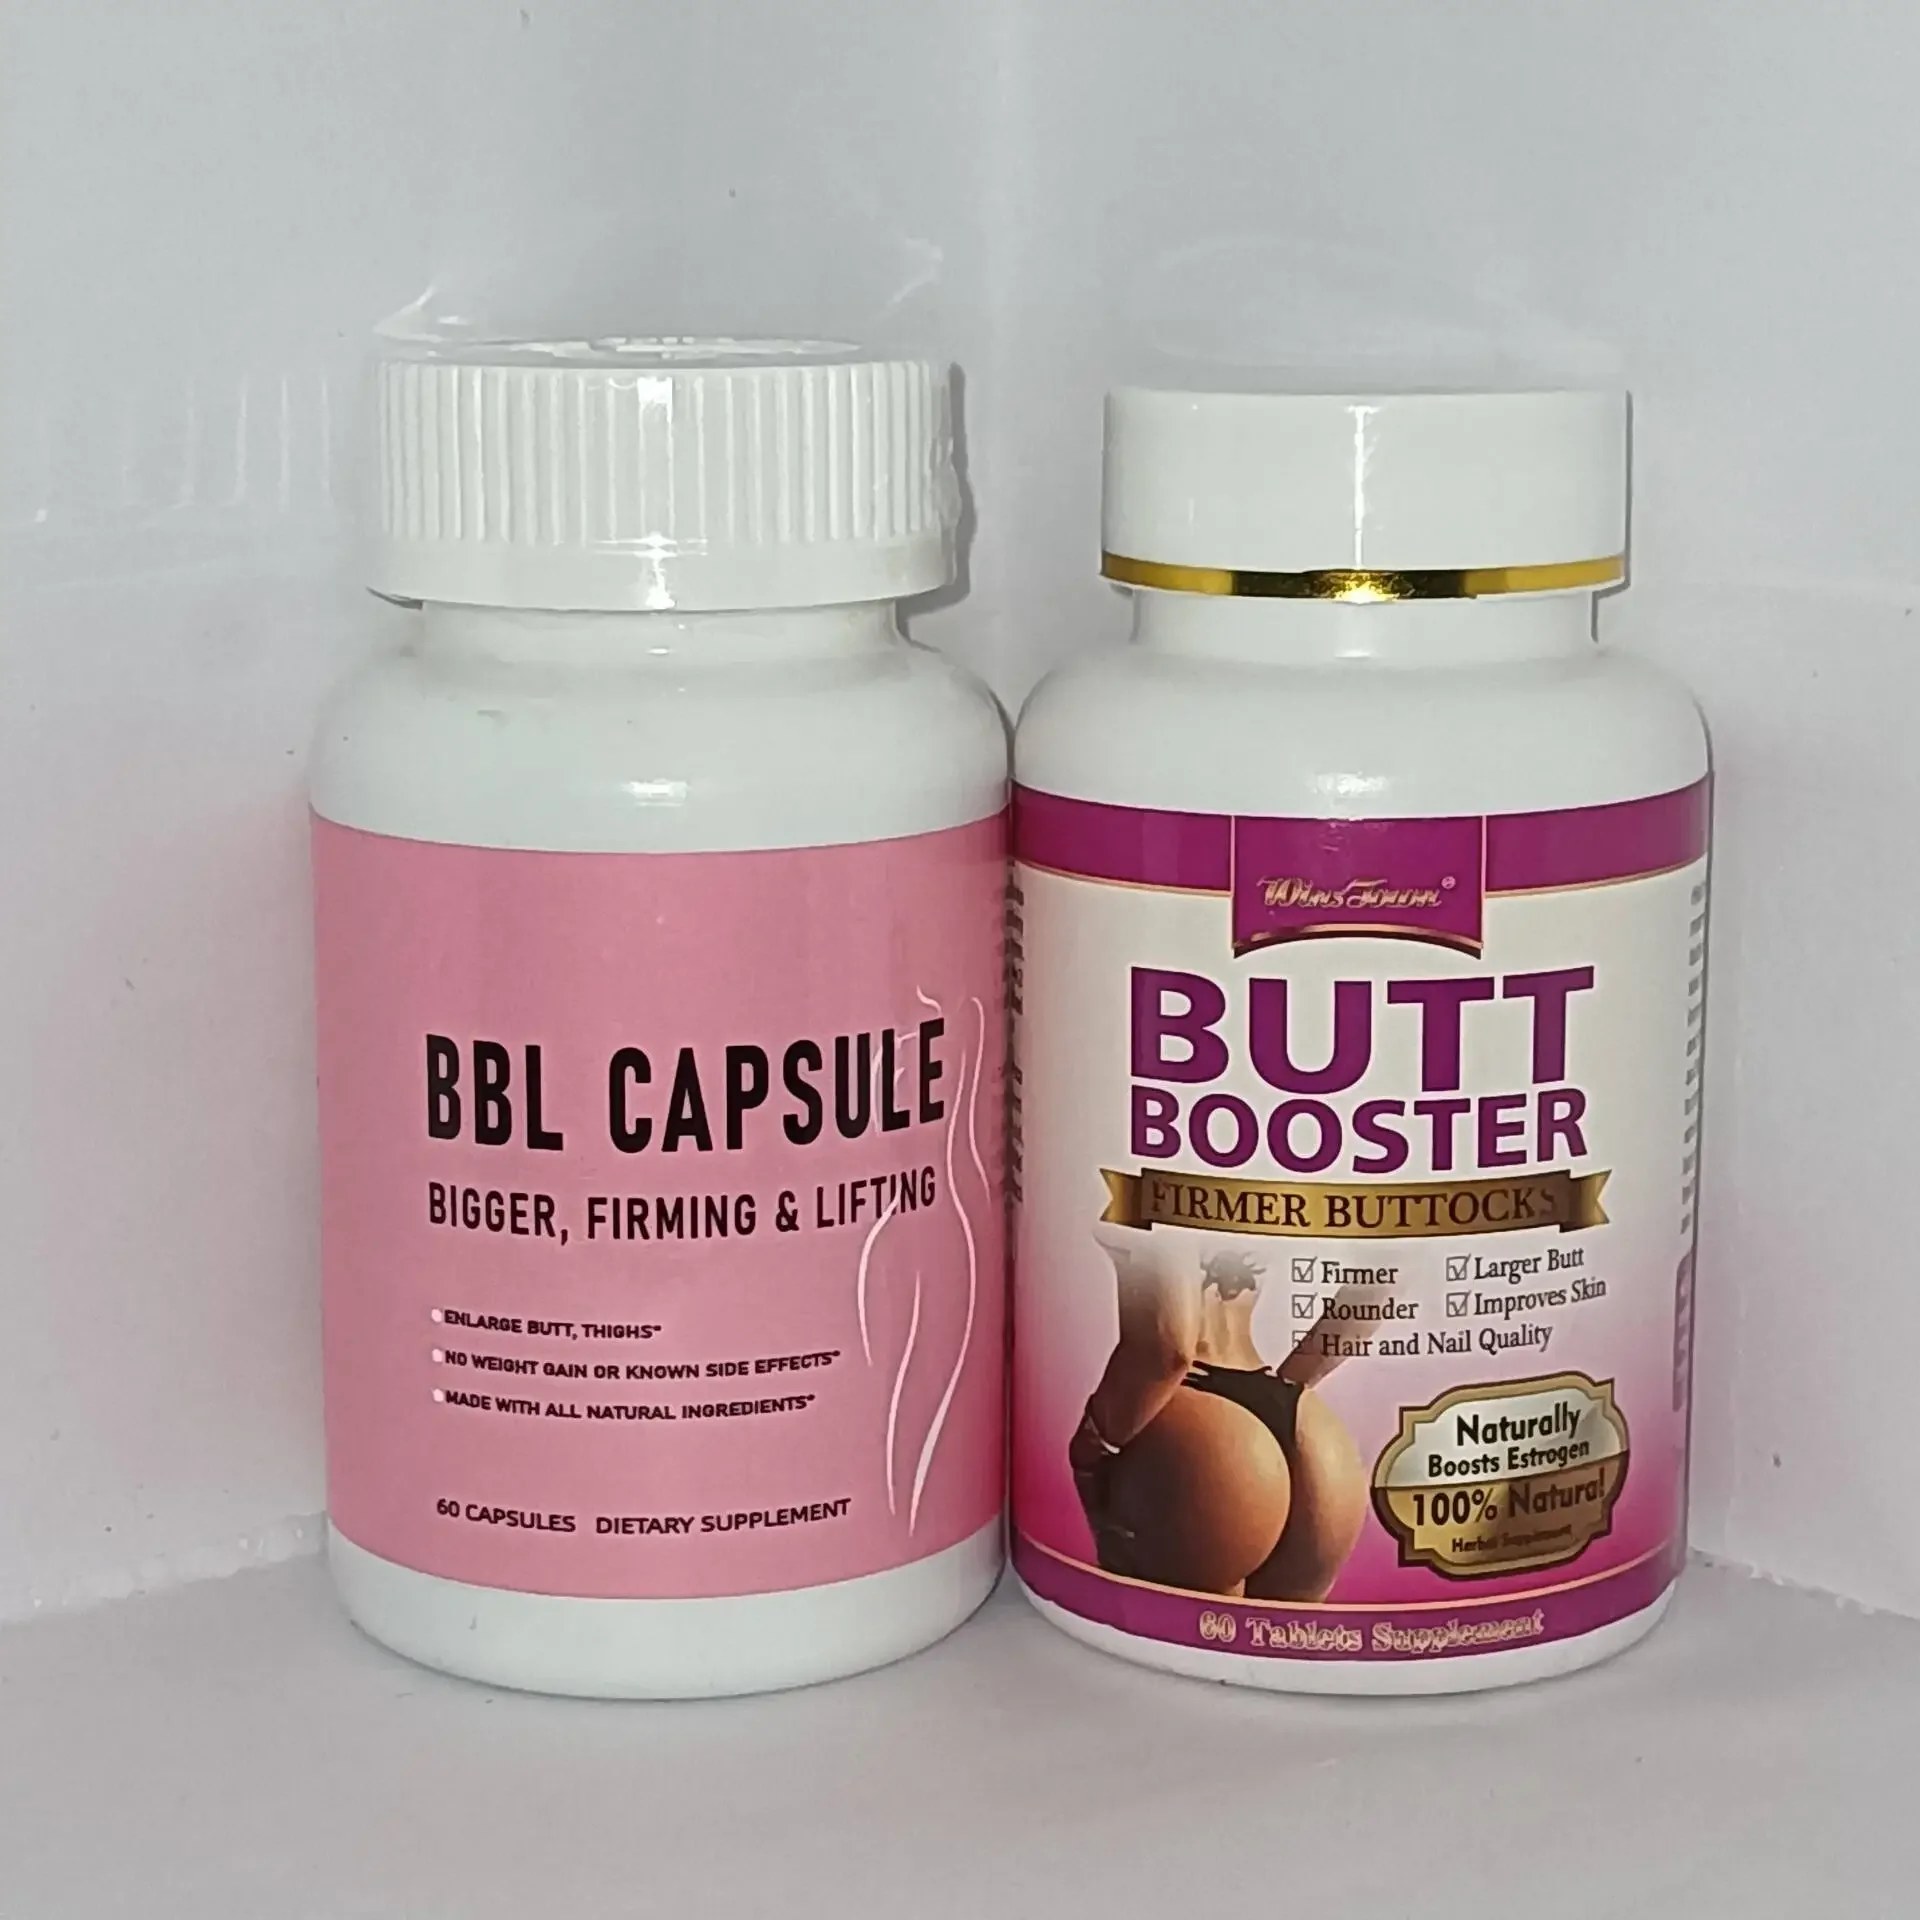 

2 bottles of hip lifting capsules for sexy dietary nutrition supplementation